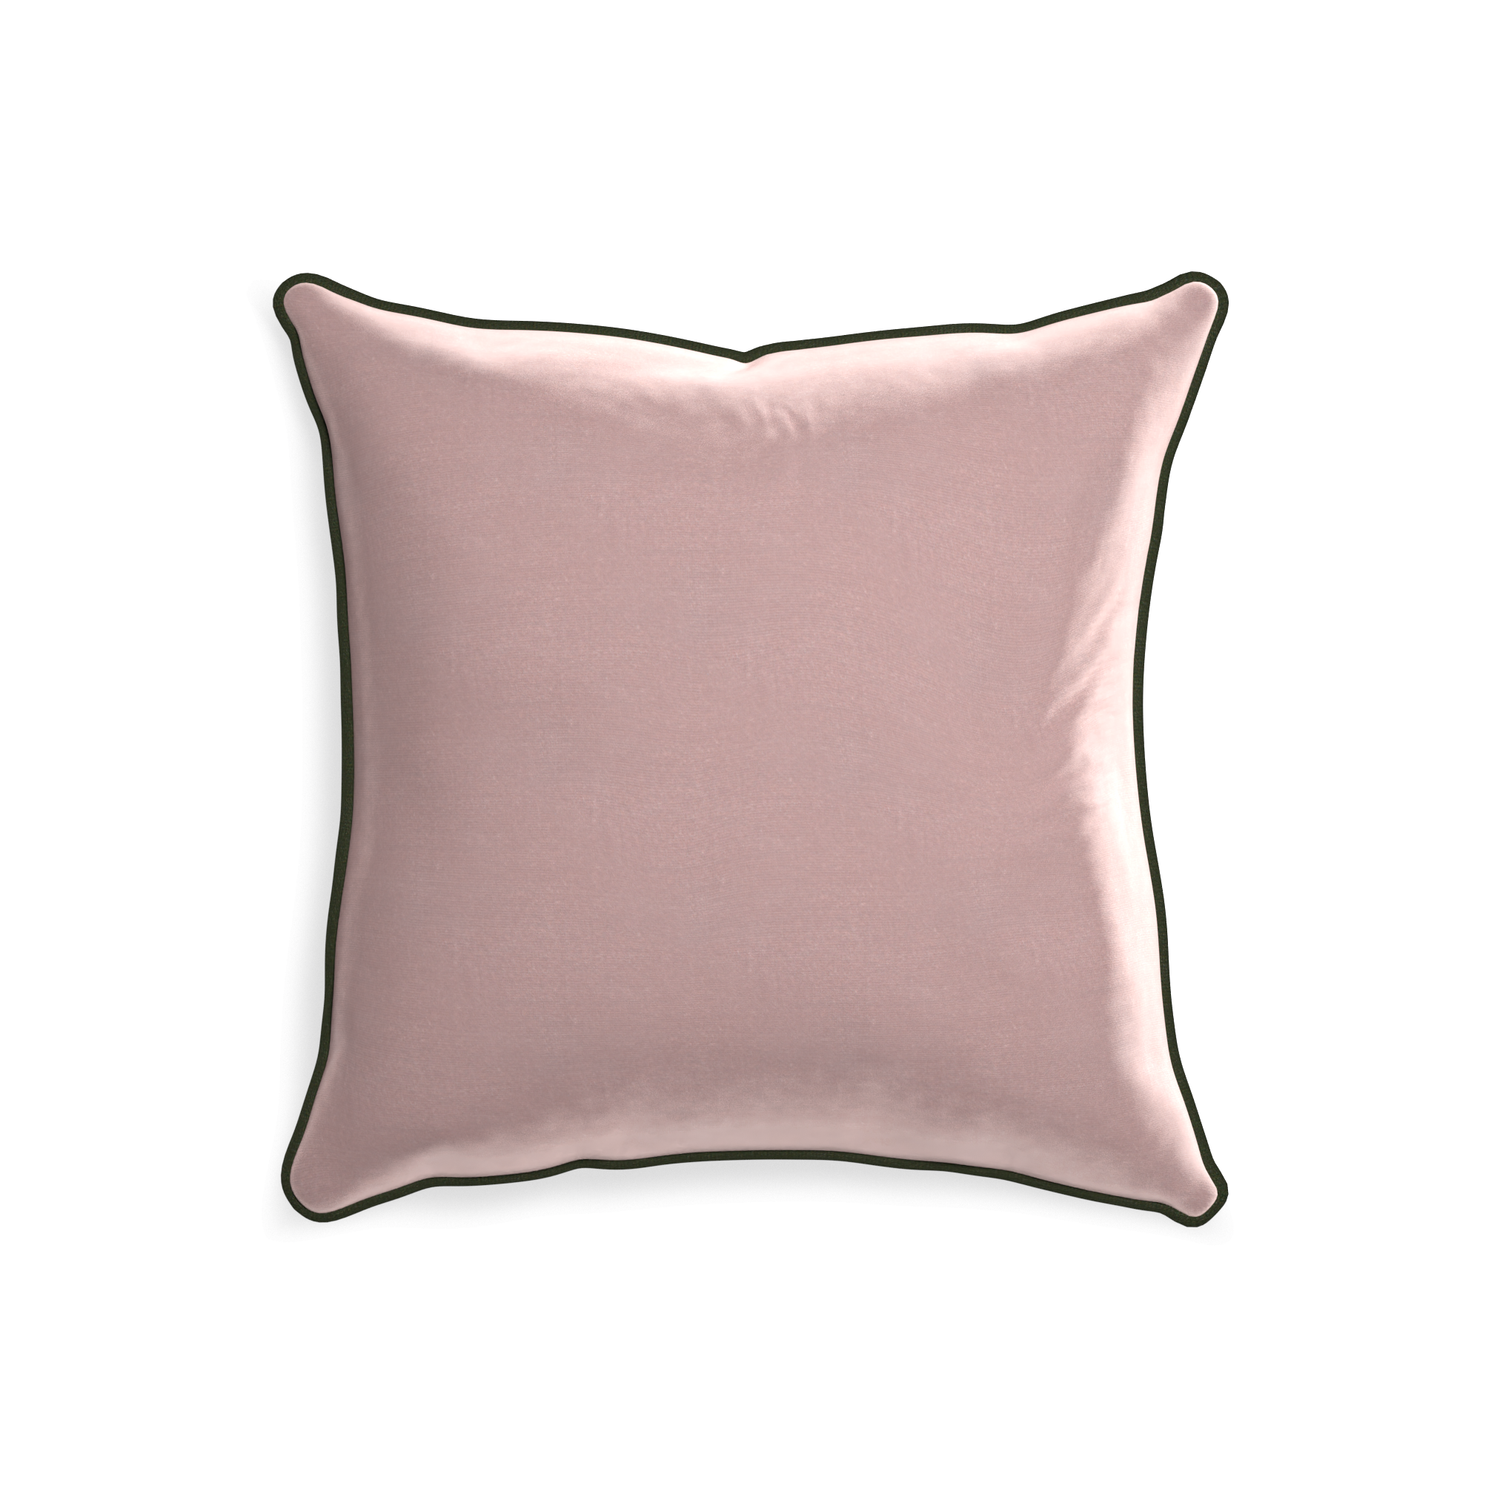 20-square mauve velvet custom pillow with f piping on white background